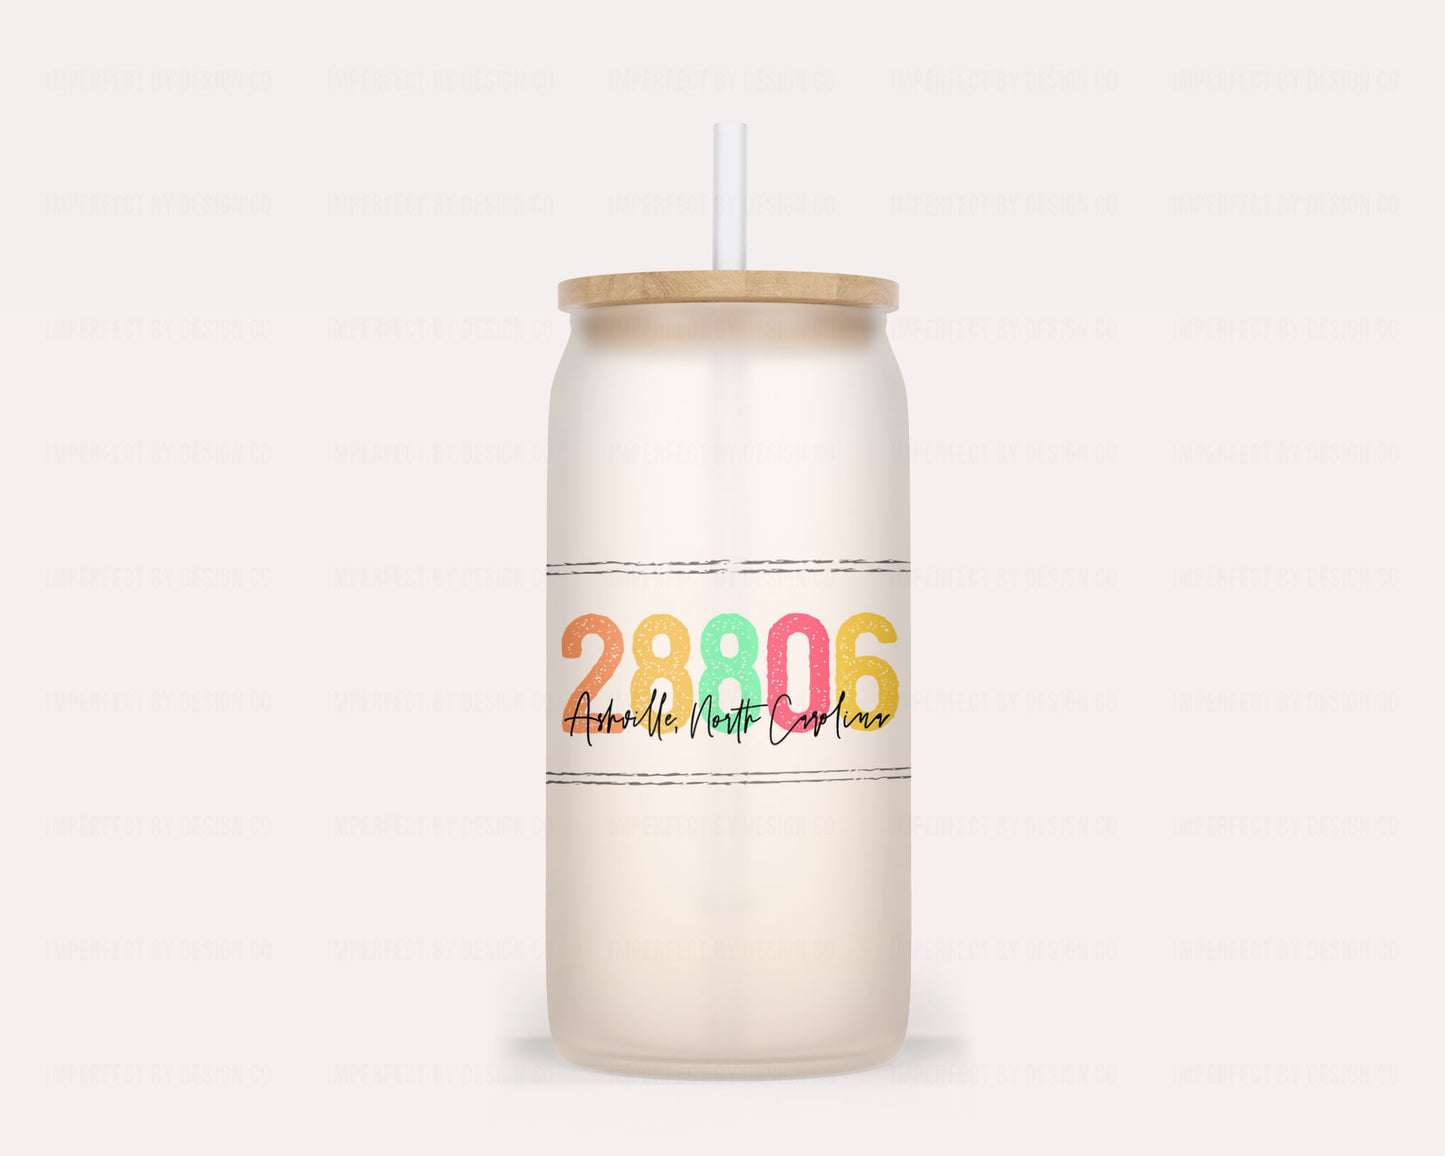 16 Ounce Frosted Glass Jar Tumbler: Color-changing feature when filled with cold beverages. | imperfect by design co